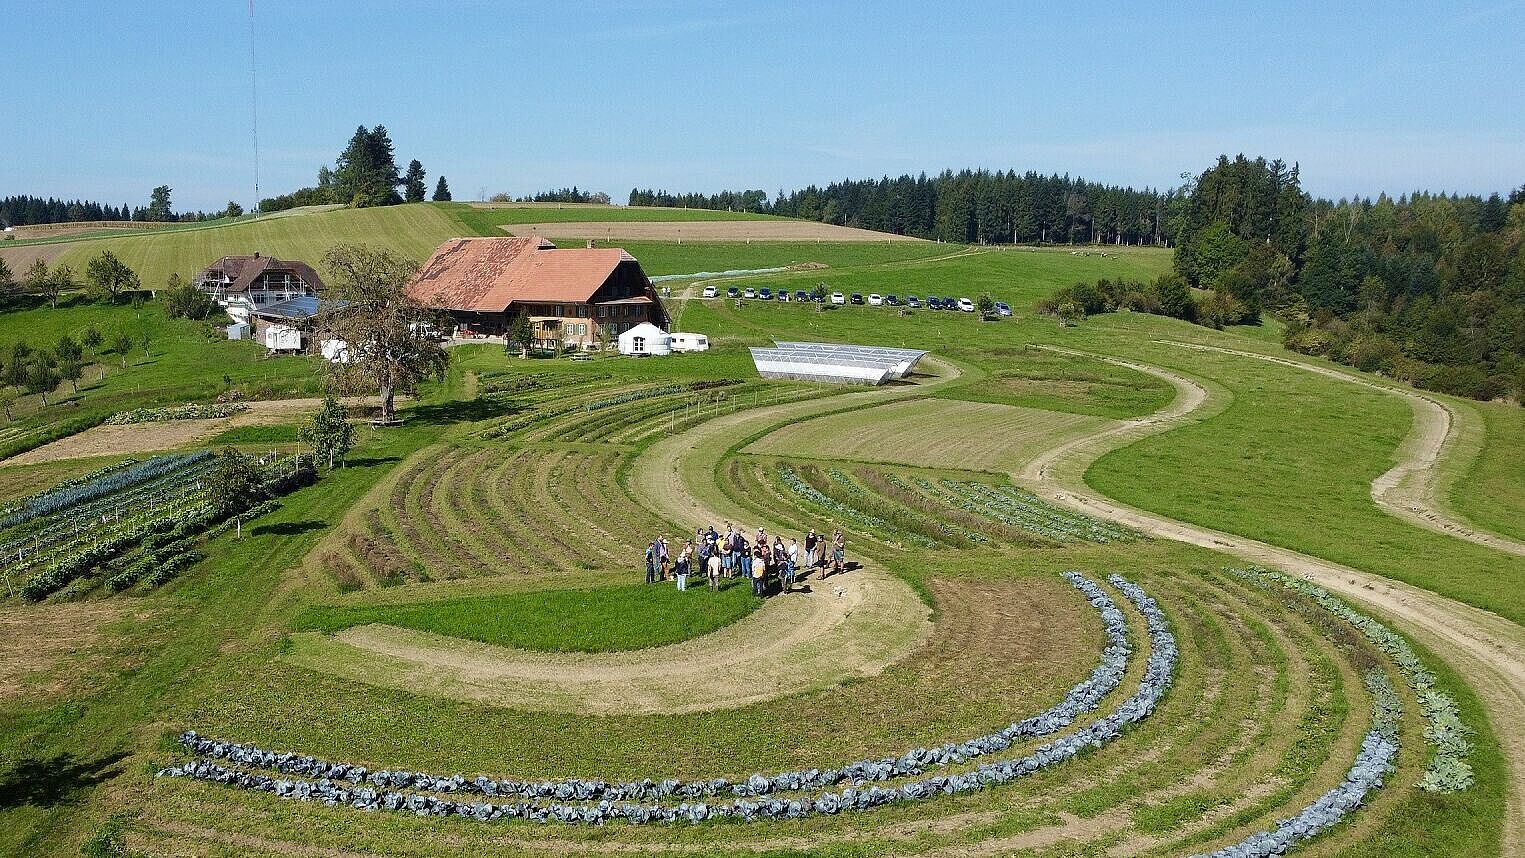 A drone shot of a farm with a keyline design, with a group of people in the centre.